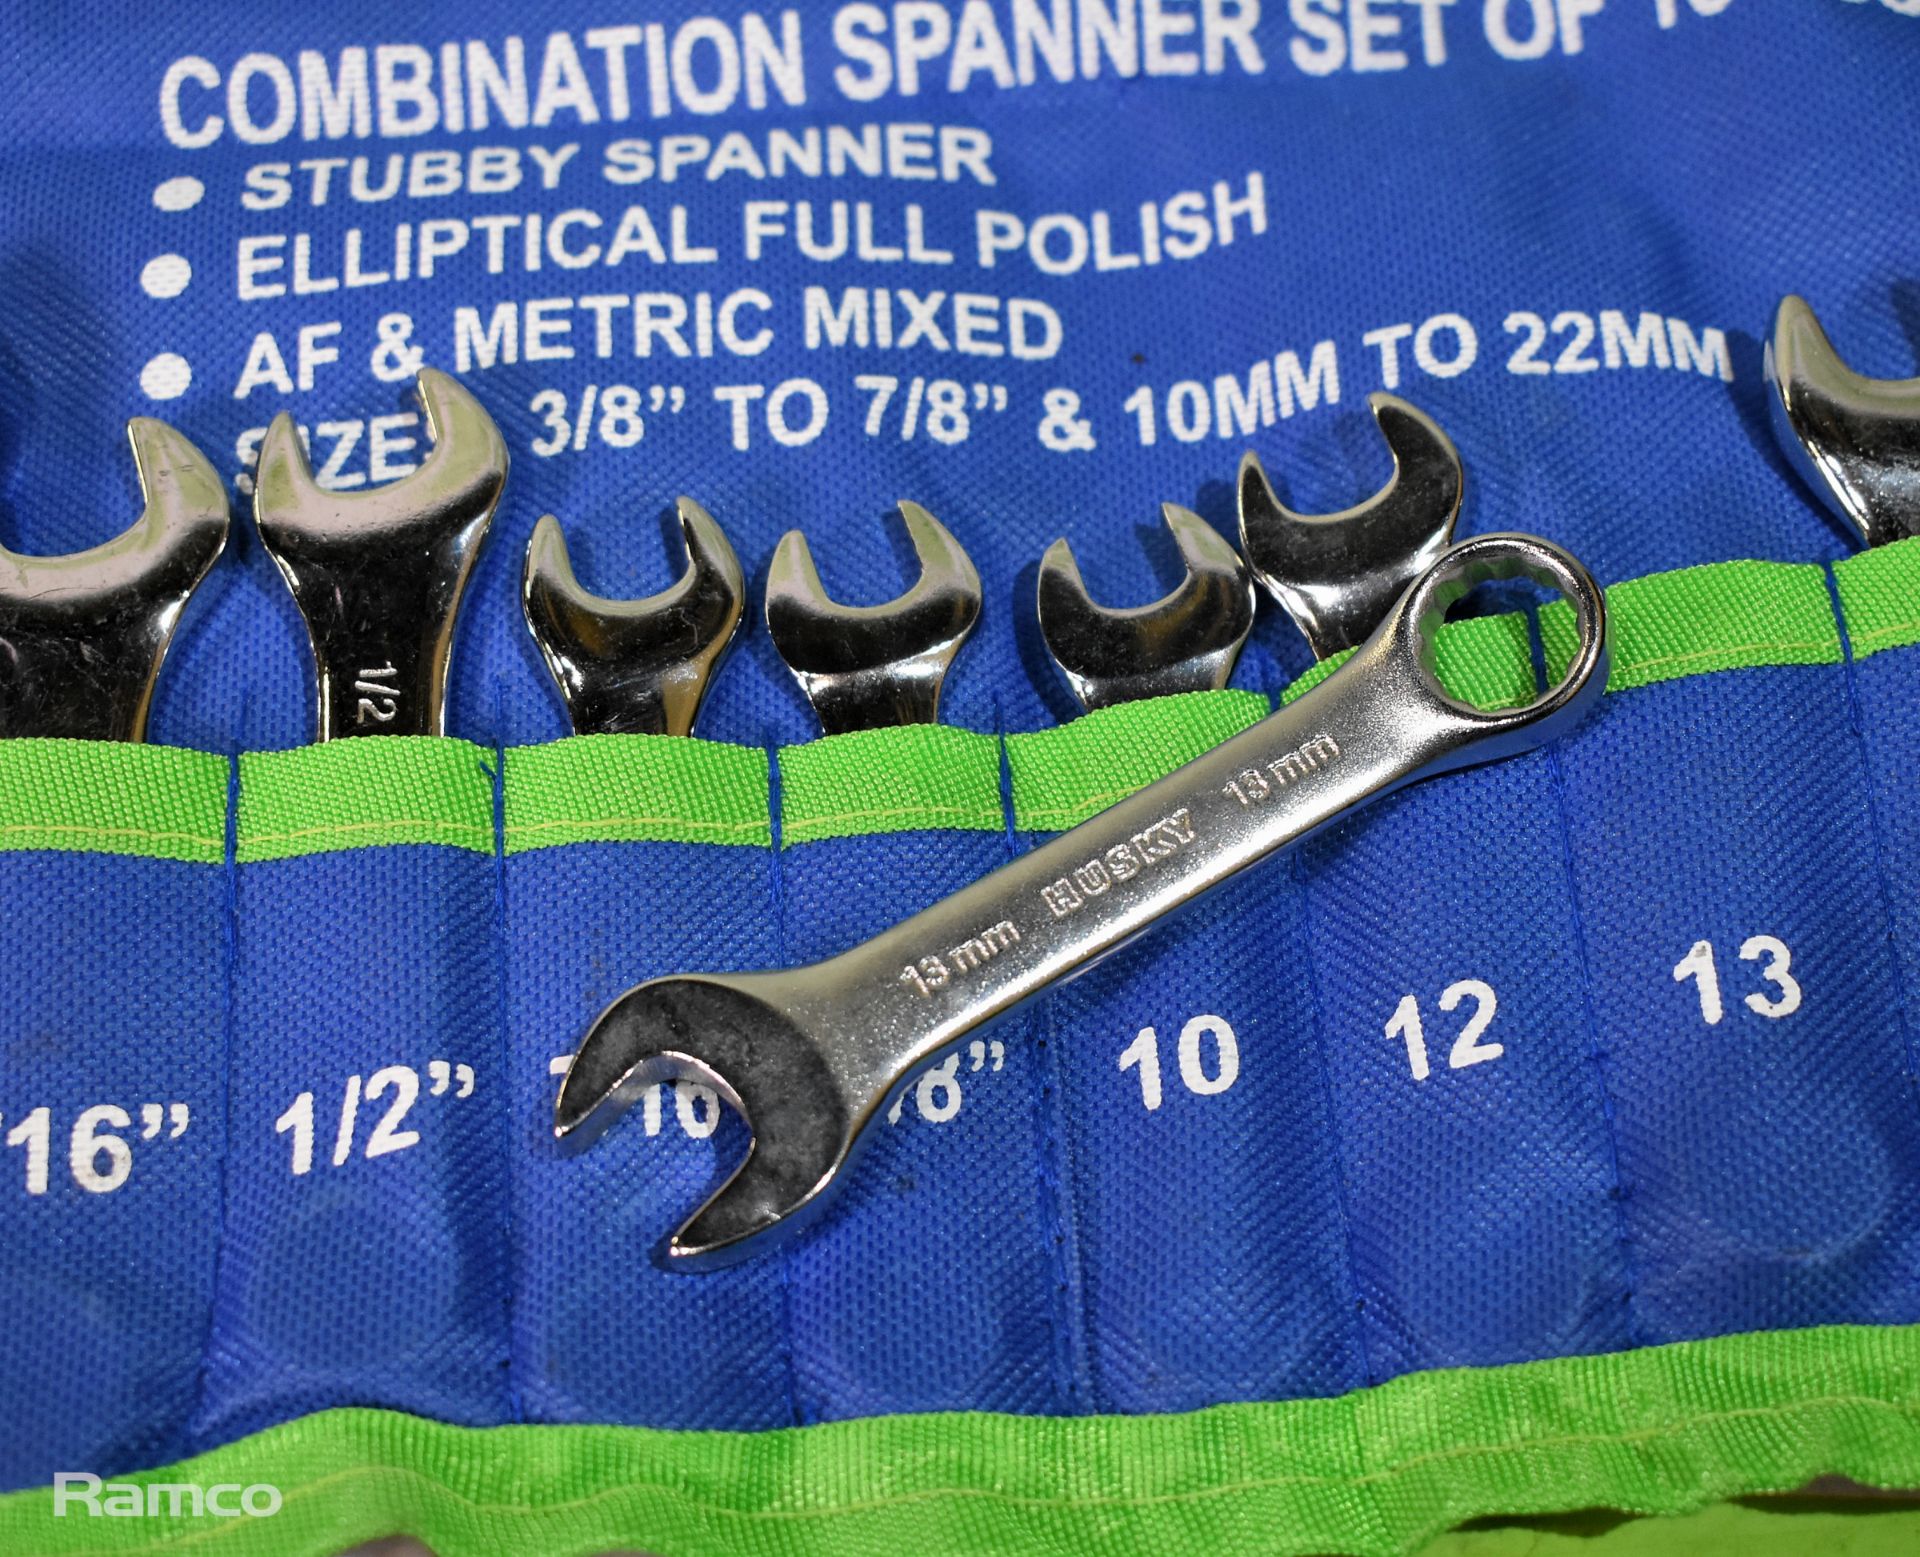 4x 16 Piece CTO150 combination stubby spanner sets - 10mm-22mm & 3/8in-7/8in & more - Image 3 of 8